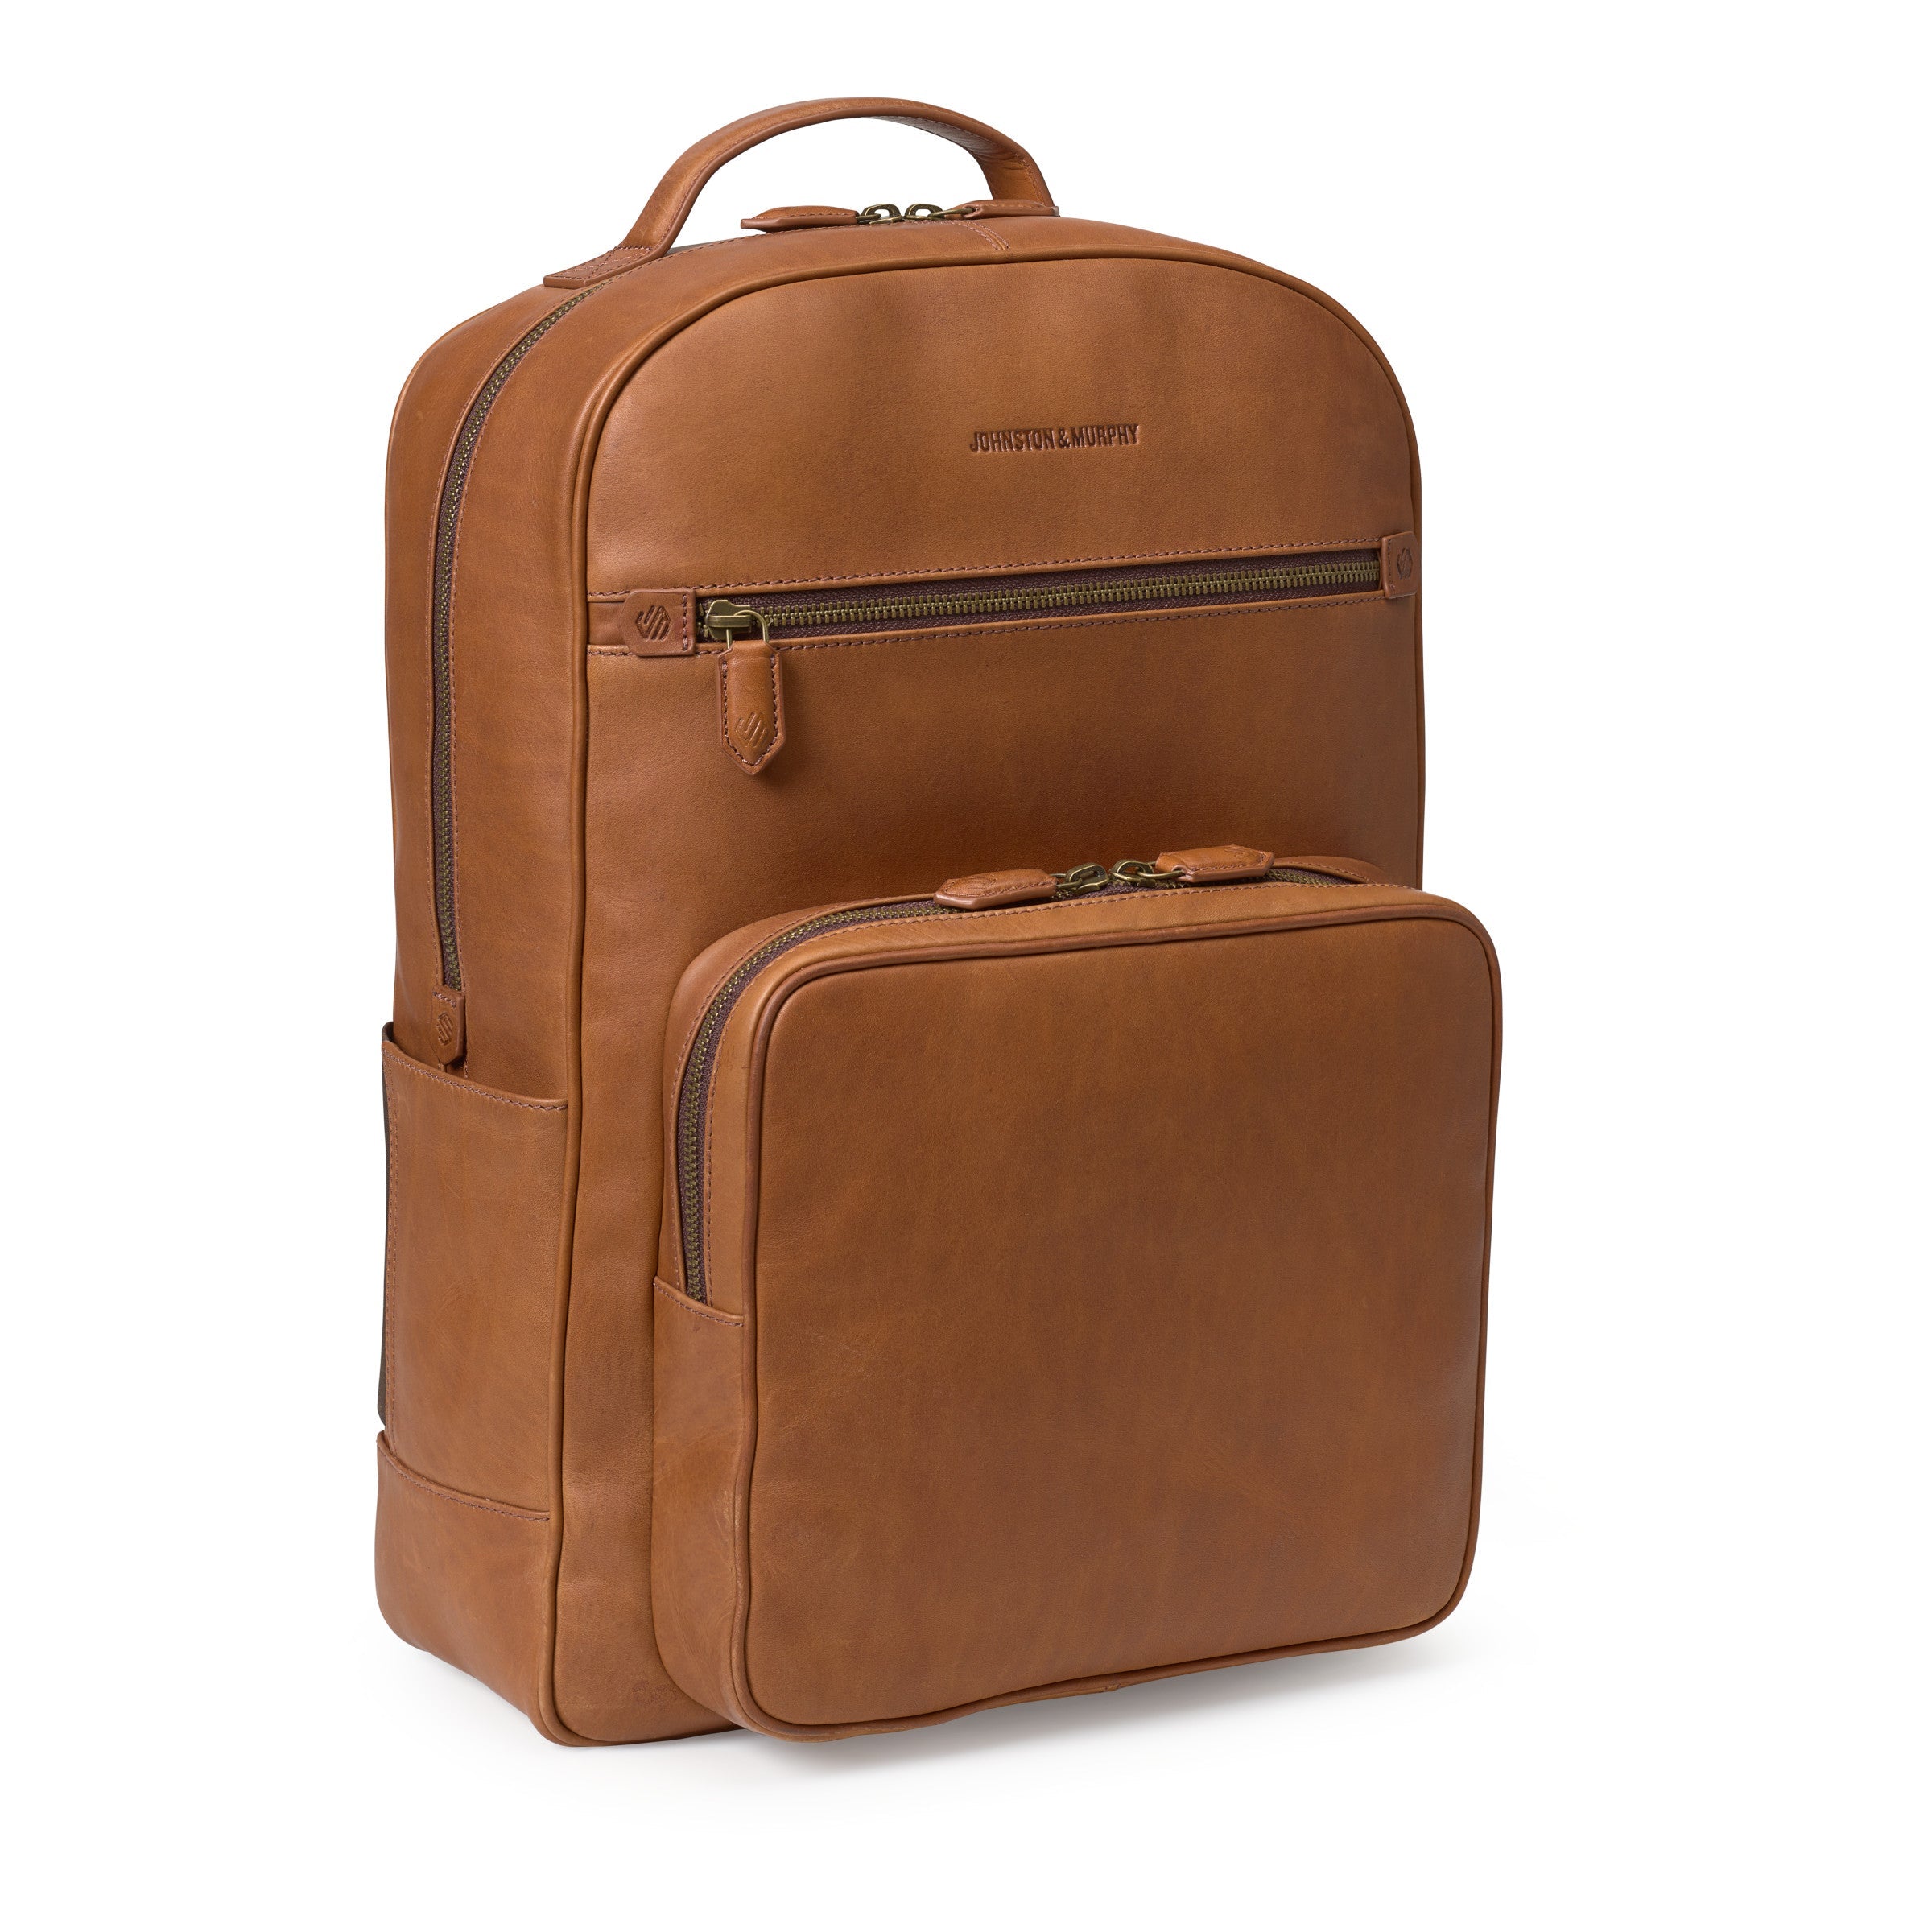 Johnston & Murphy Rhodes Backpack – Luggage Pros